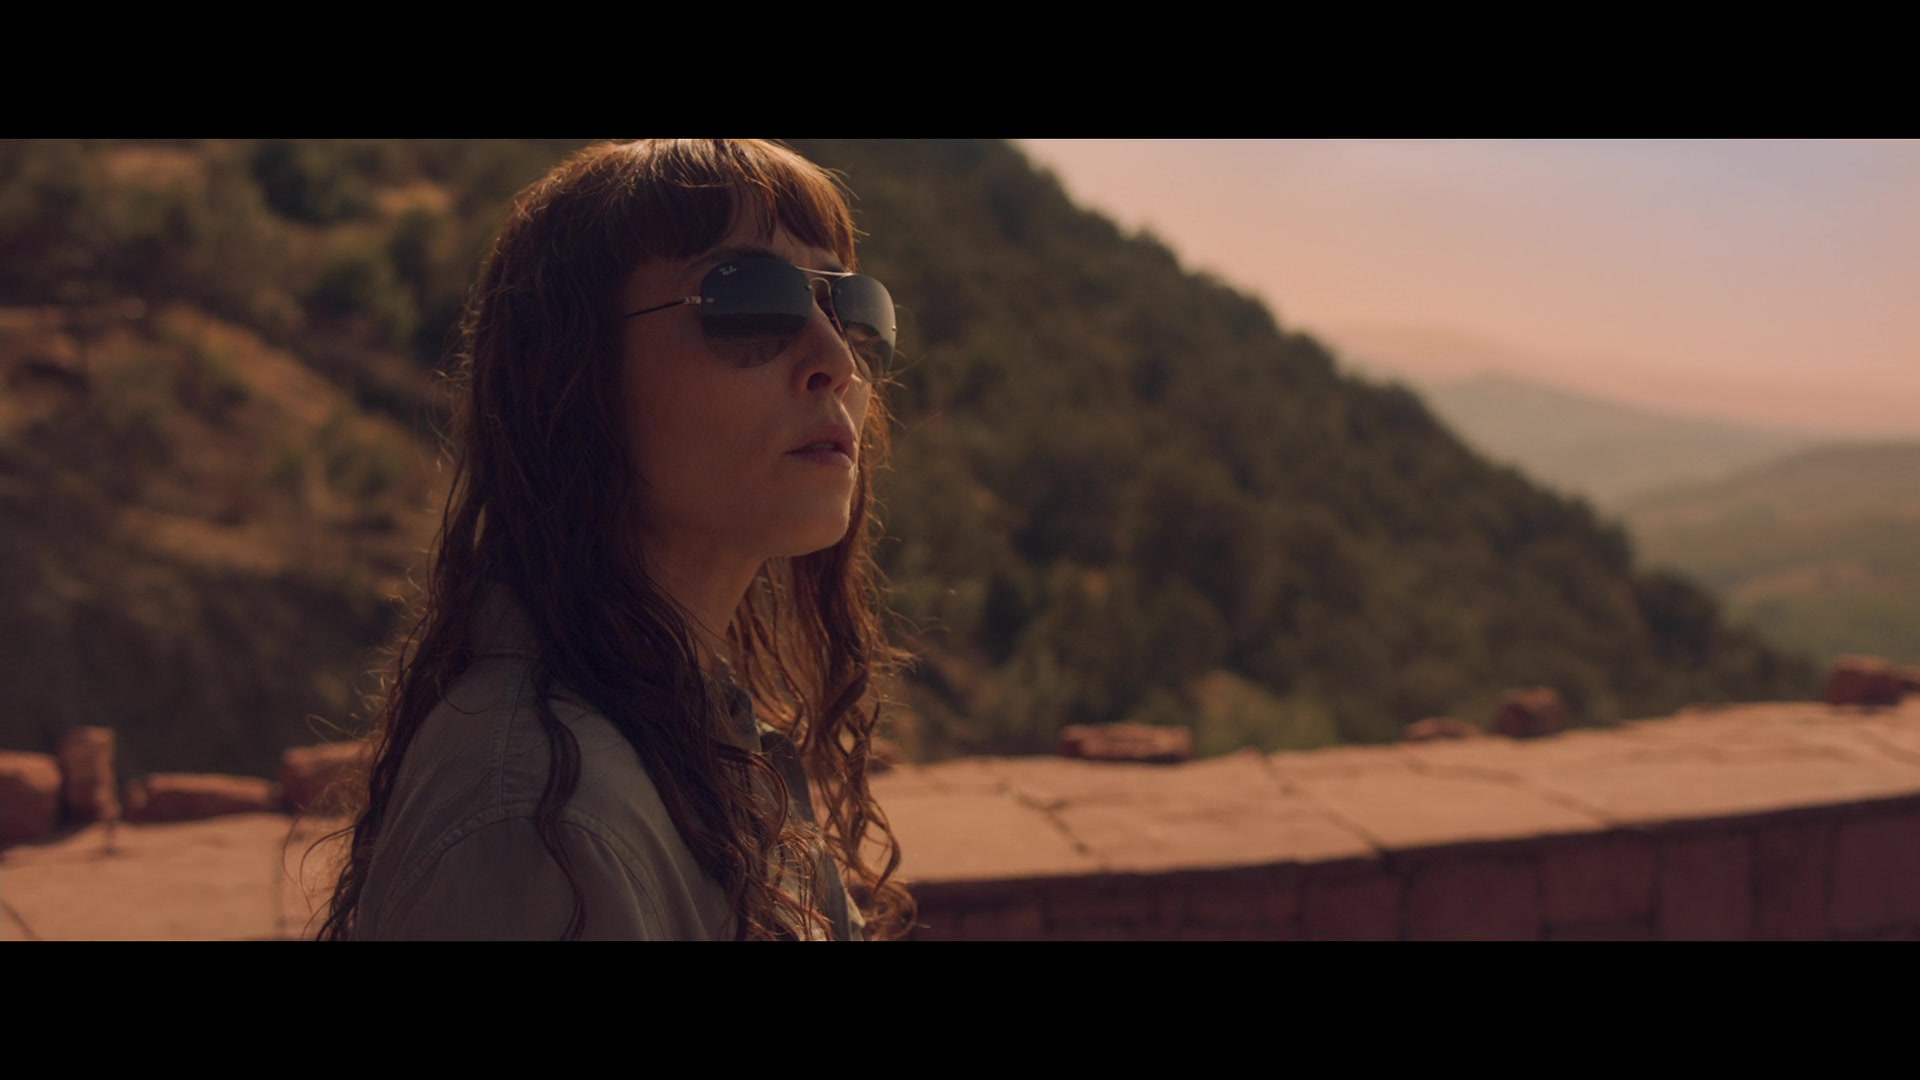 Ray-Ban Women's Sunglasses Worn by Noomi Rapace in Close (2019) Movie1920 x 1080